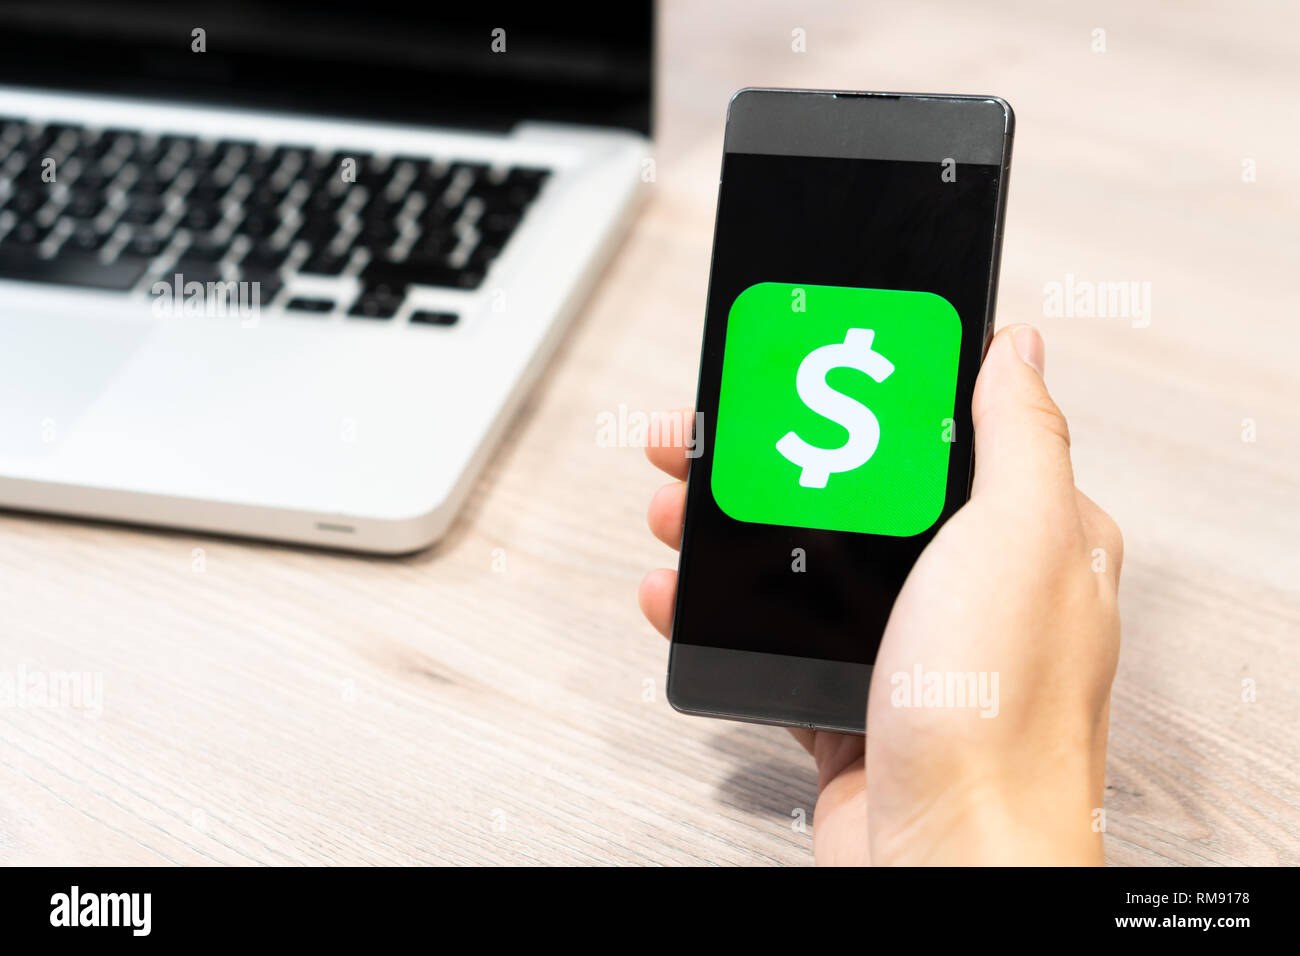 Cash App logo by Square inc displayed on smartphone held by human hand next to computer laptop - Slovenia 13.02.2019 Stock Photo